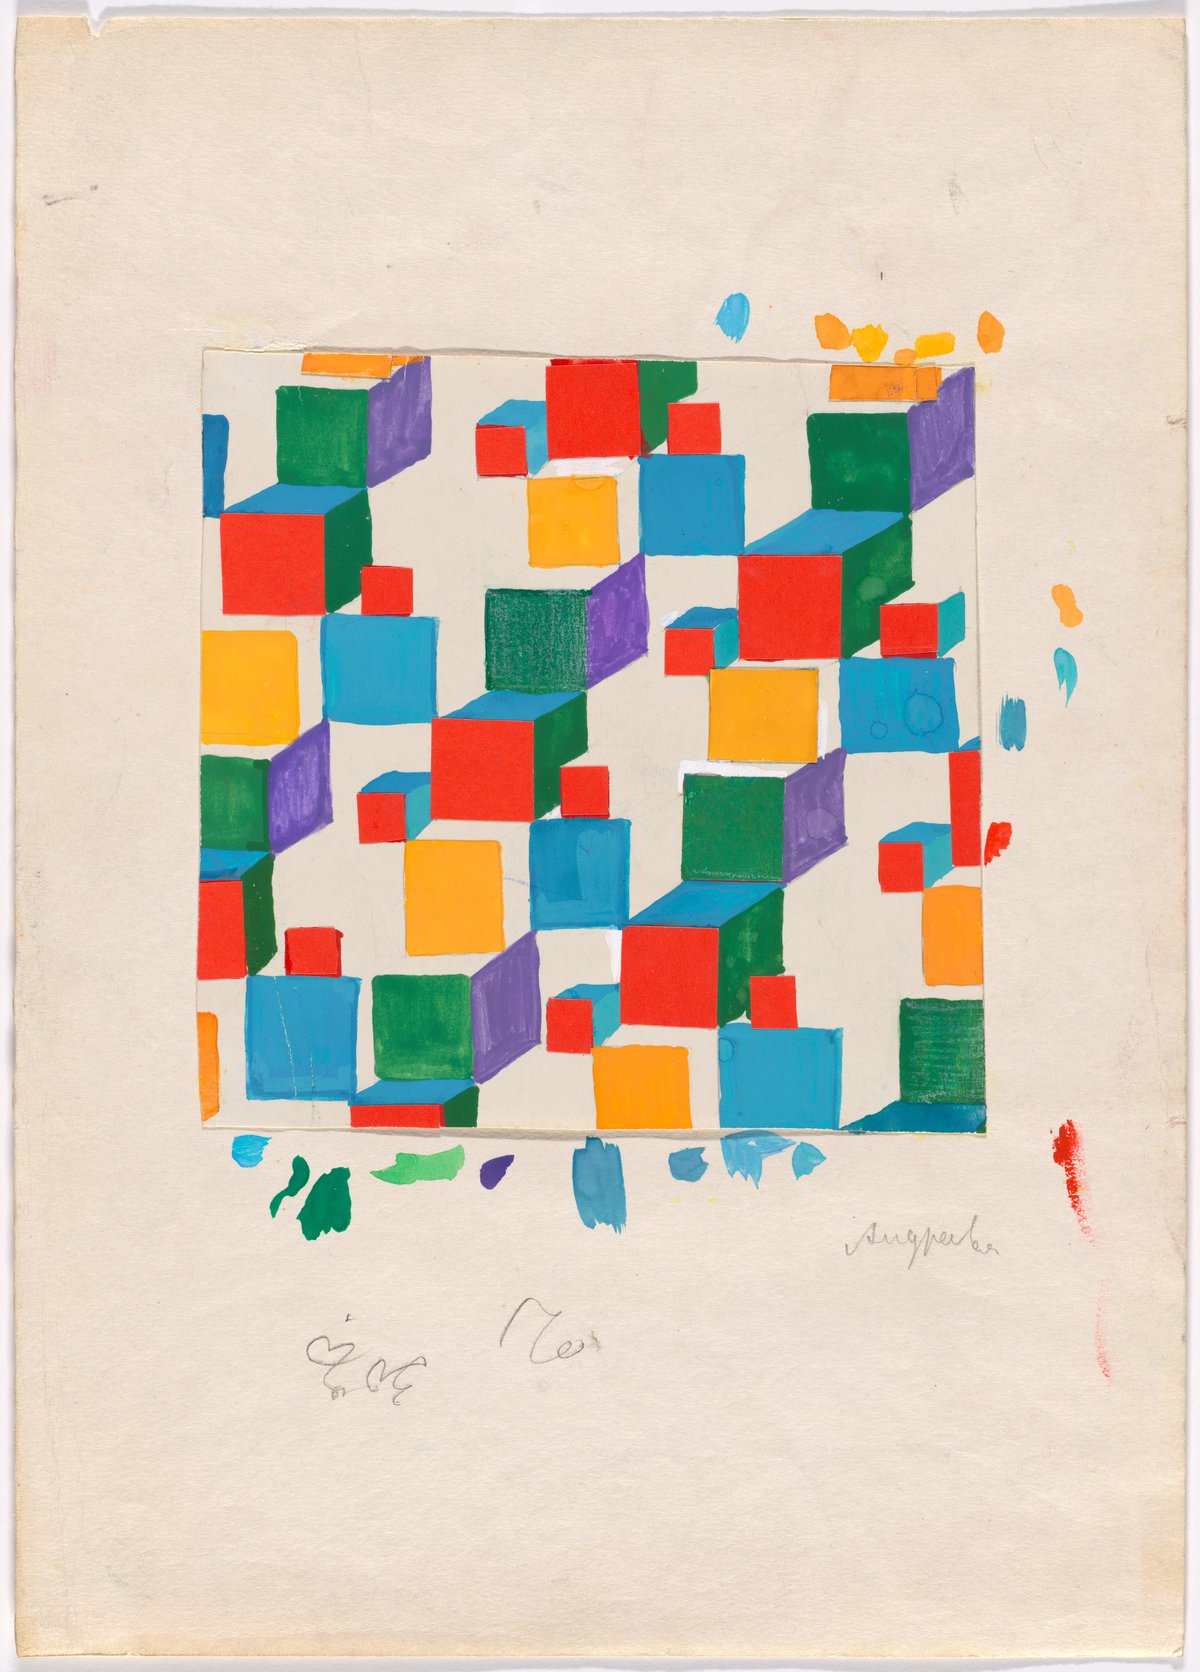 Anna AndreevaCubes (design for children&#x27;s textile), c. 1960sTempera, crayon, and collage on paper20.5 × 20.2 cmCourtesy the Museum of Modern Art, New YorkDigital Image © 2022 The Museum of Modern Art, New York